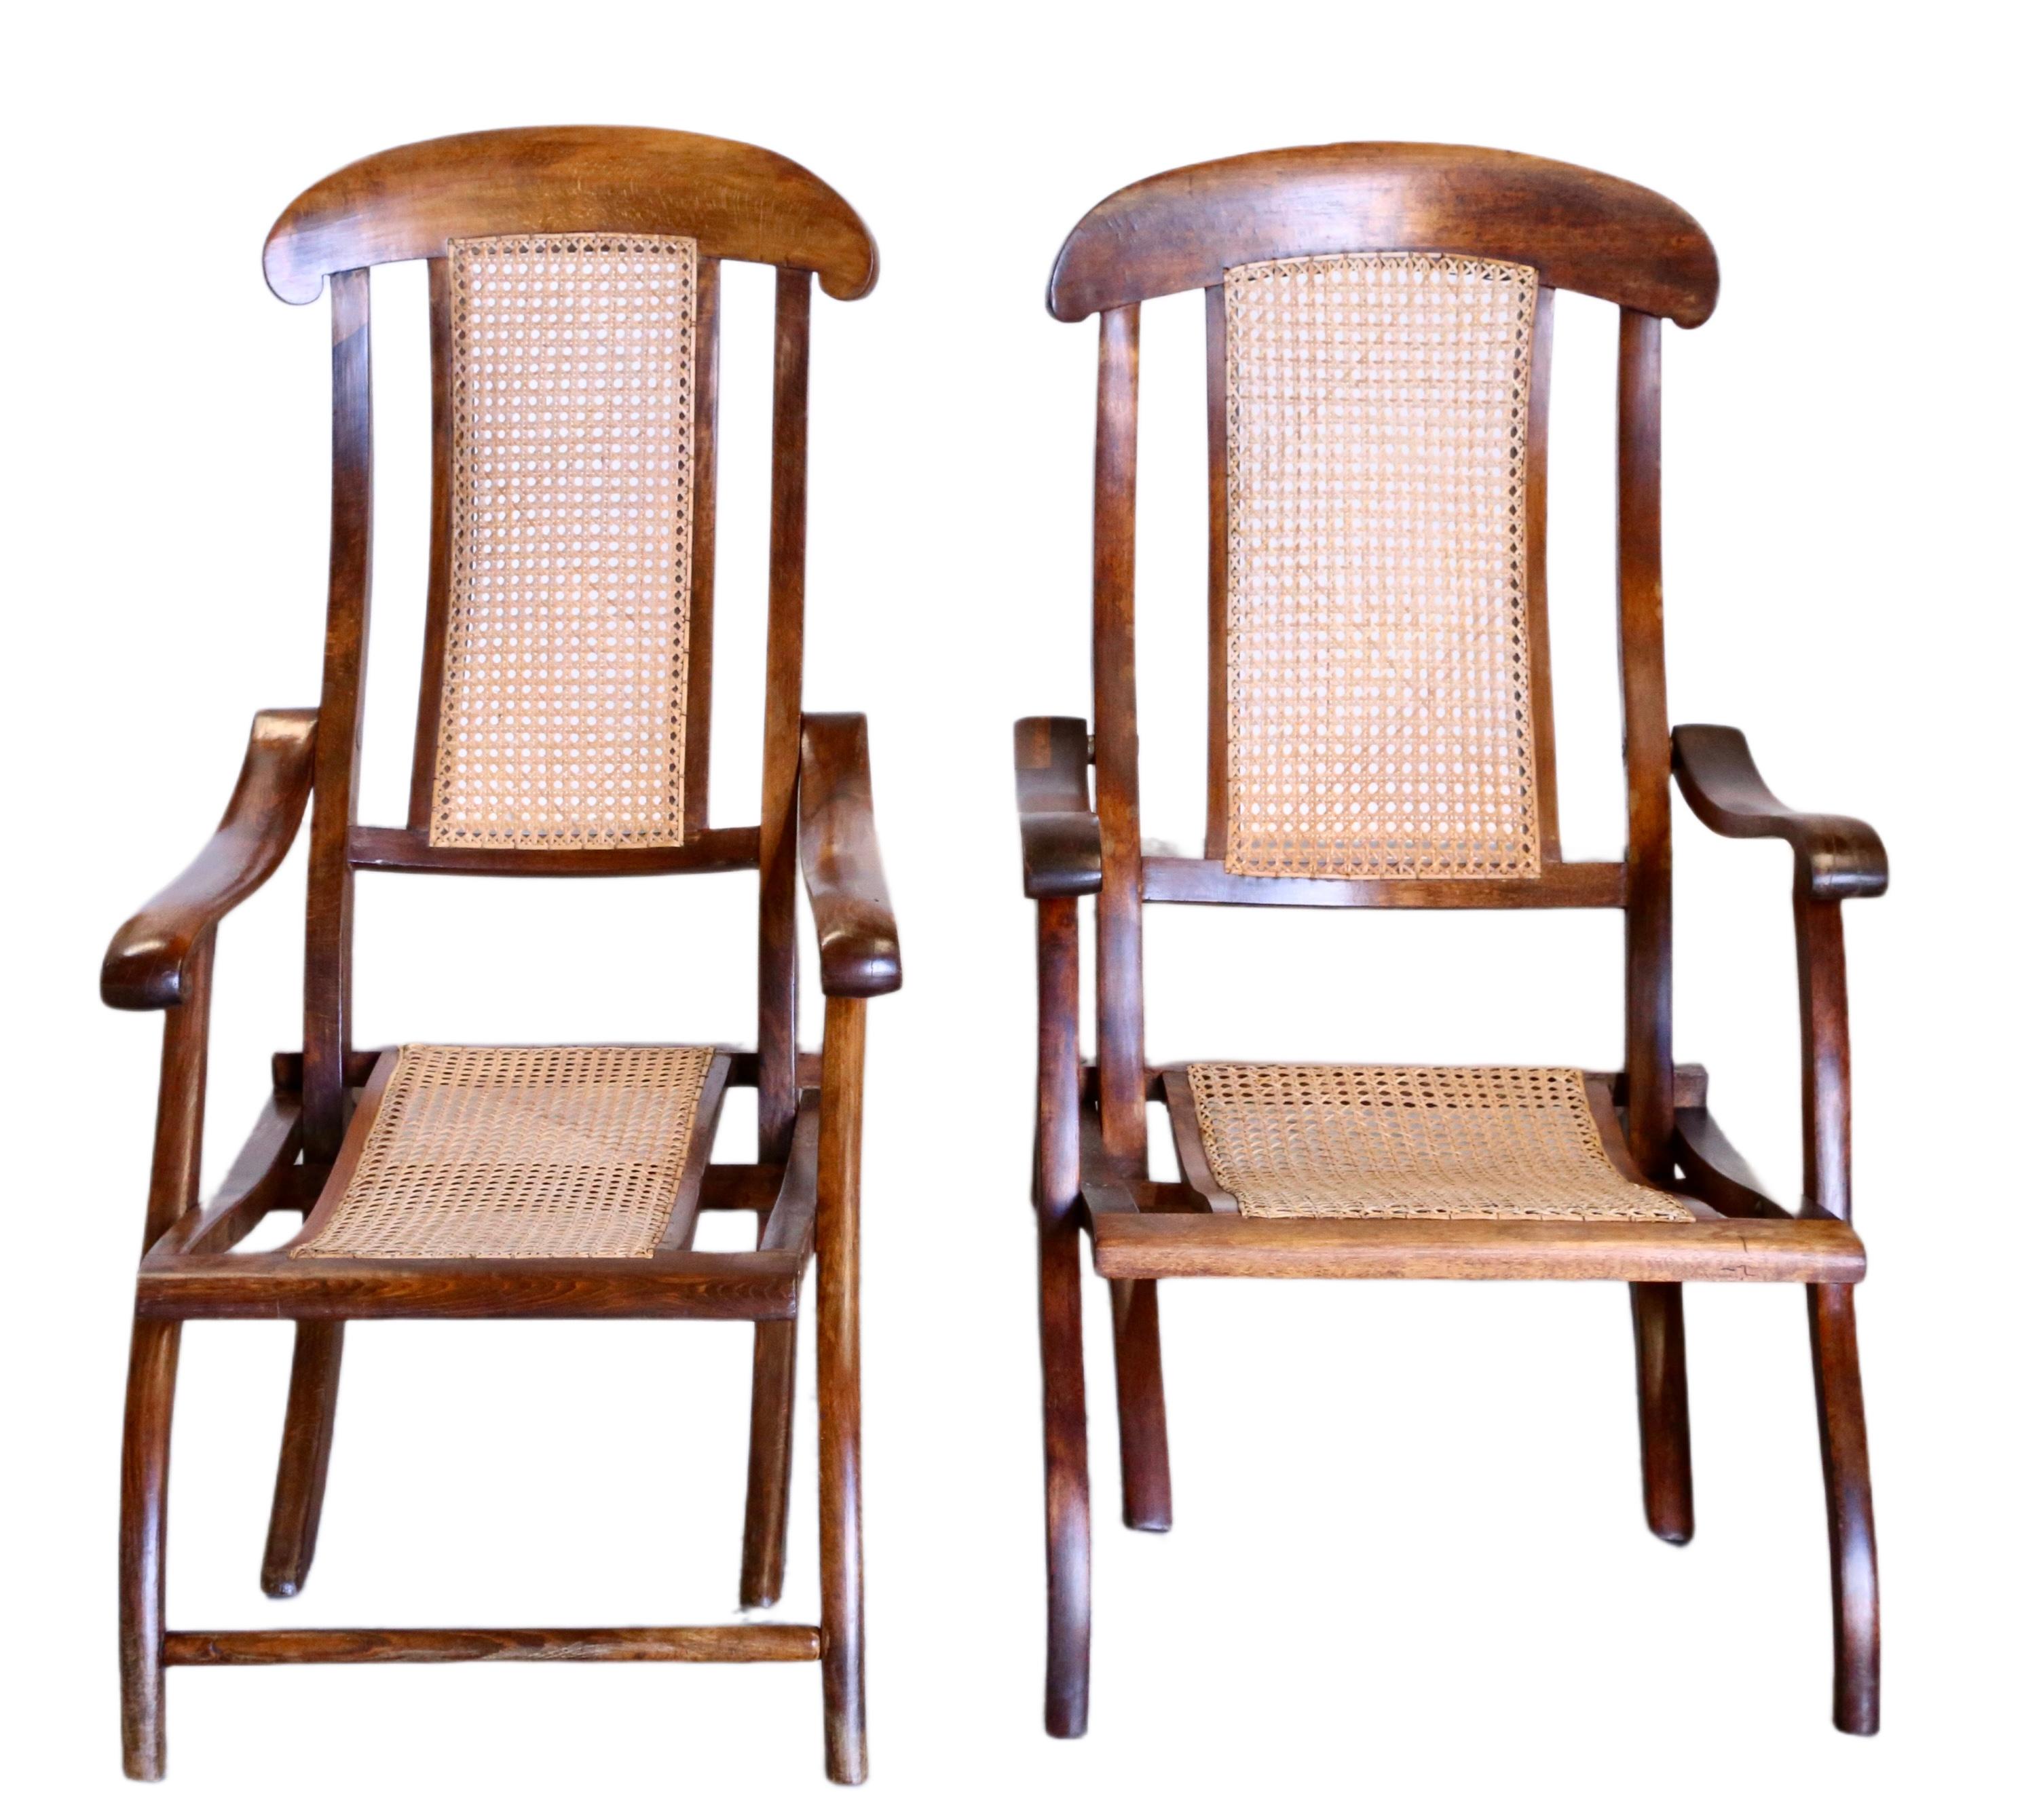 Step back in time to the adventurous era of the Victorian age with these exquisite folding steamer chairs - slightly different size, crafted from solid walnut and adorned with woven cane. These chairs, reminiscent of the grand voyages undertaken by